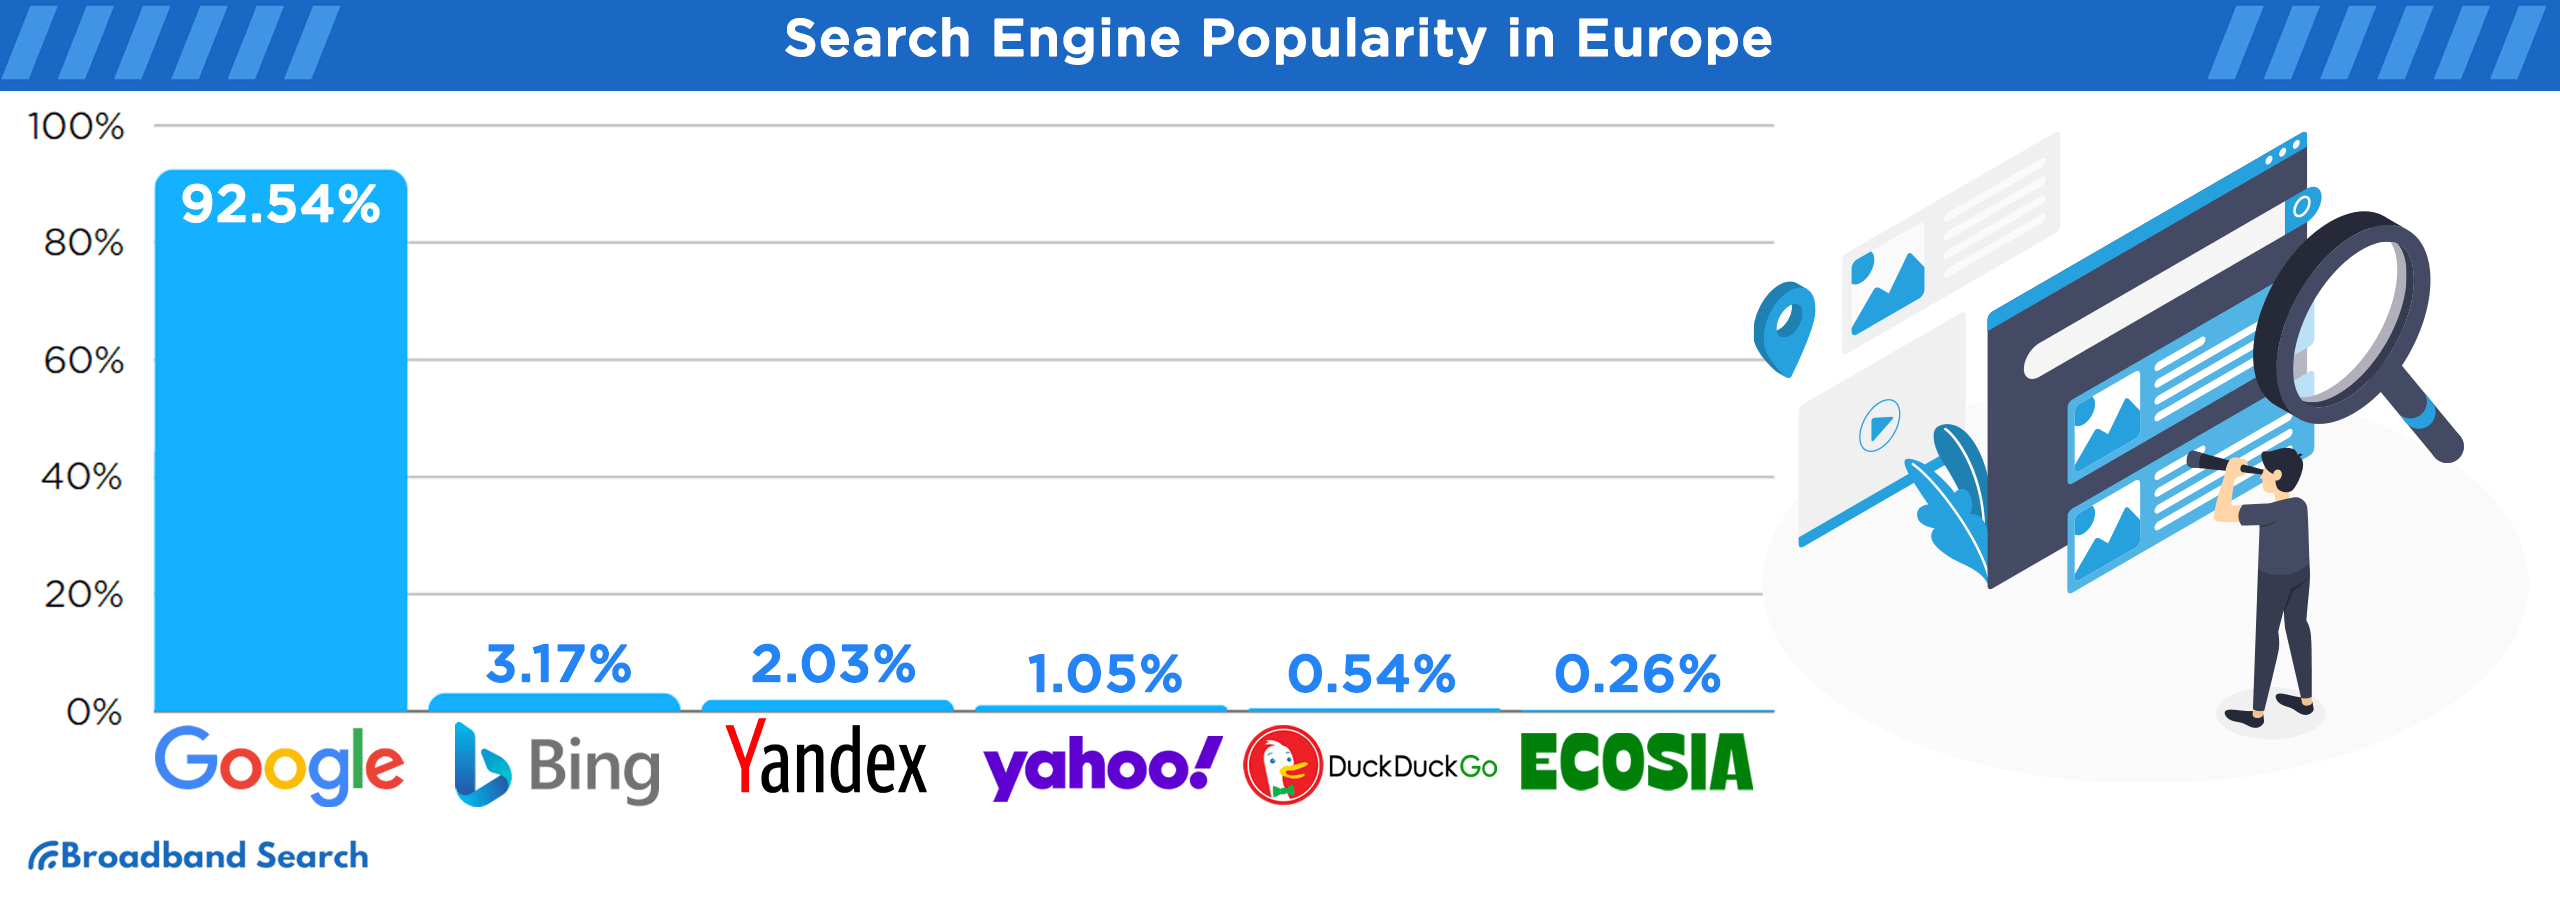 Search engine popularity in Europe